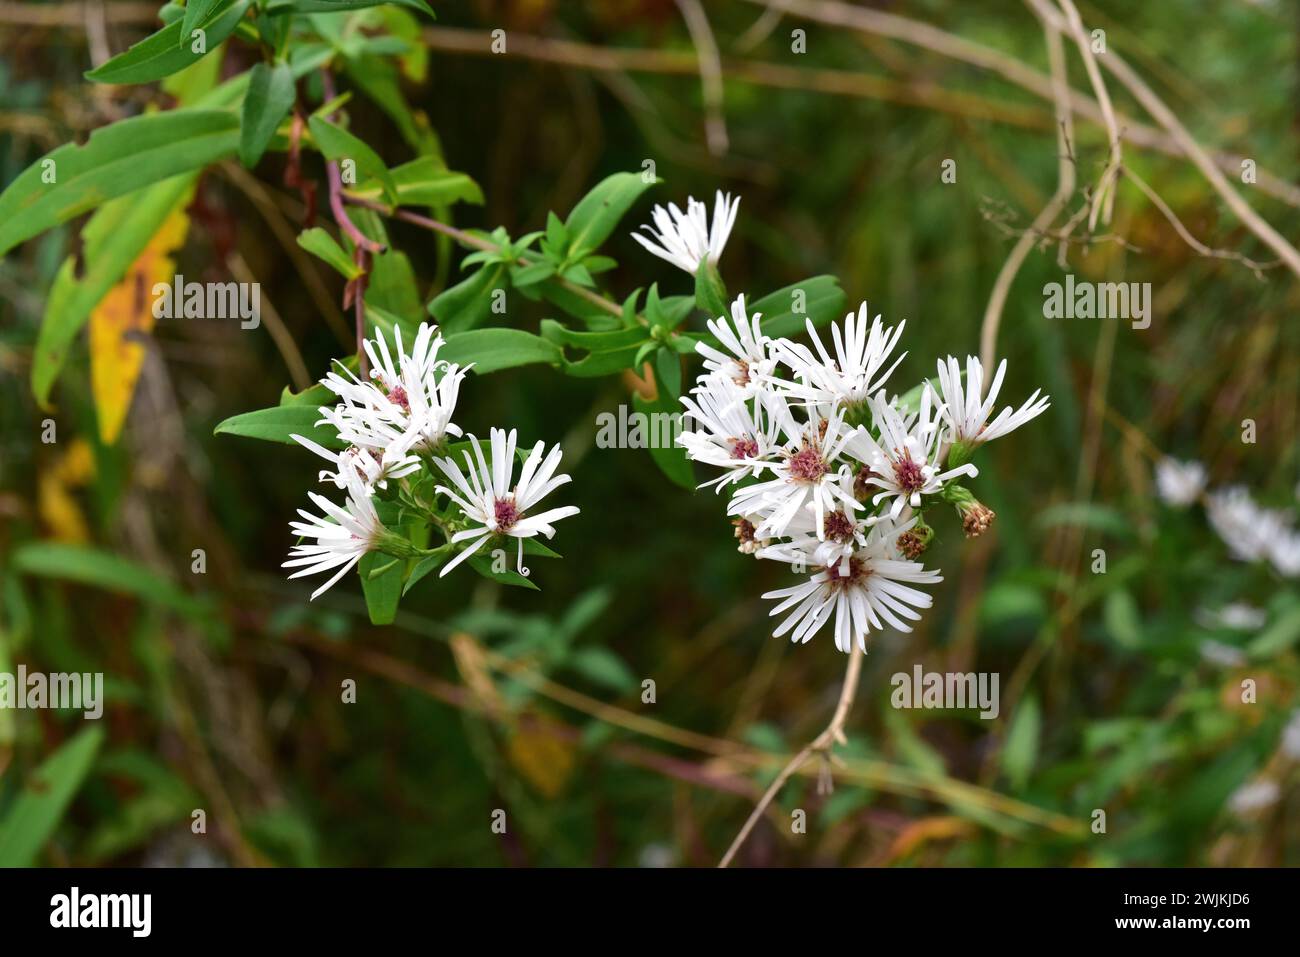 Frost aster or hairy white oldfield aster (Aster pilosus or Symphyotrichum pilosum) is an herb native to North America but naturalized in other temper Stock Photo